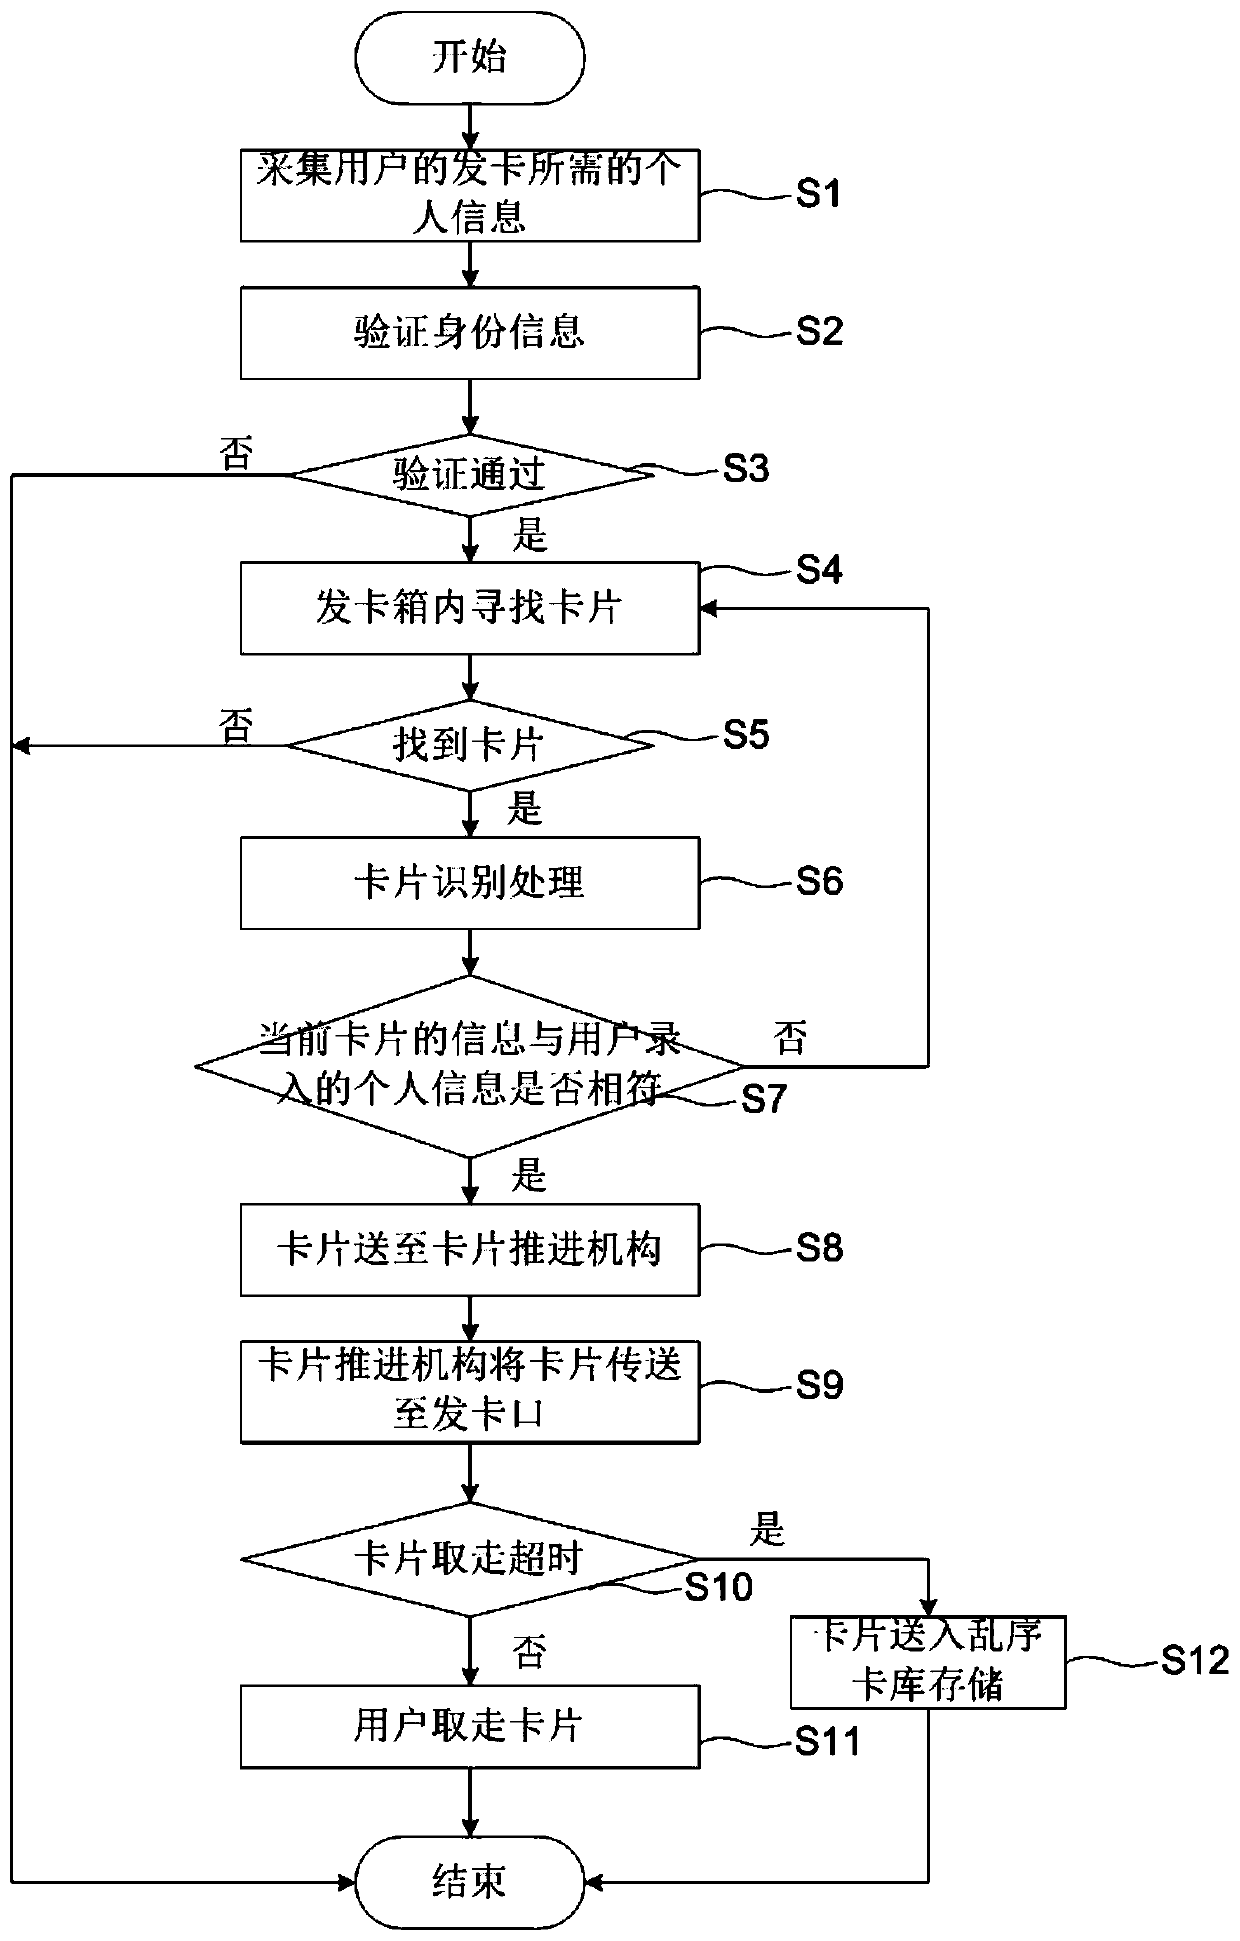 Card issuing method and system